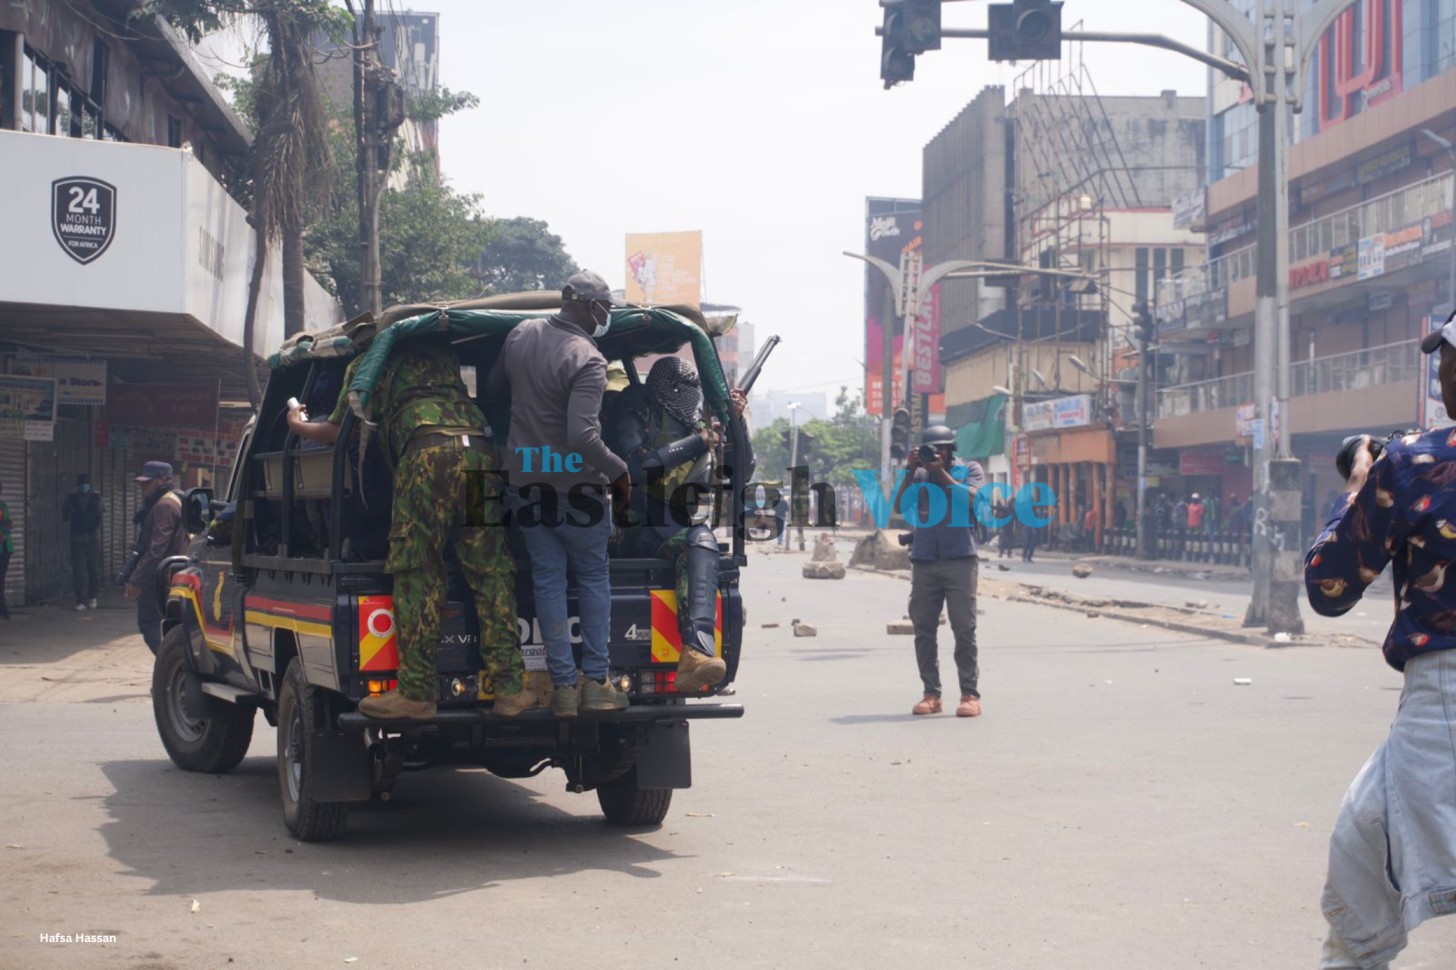 Police disperse protesters in Nairobi on Tuesday, J